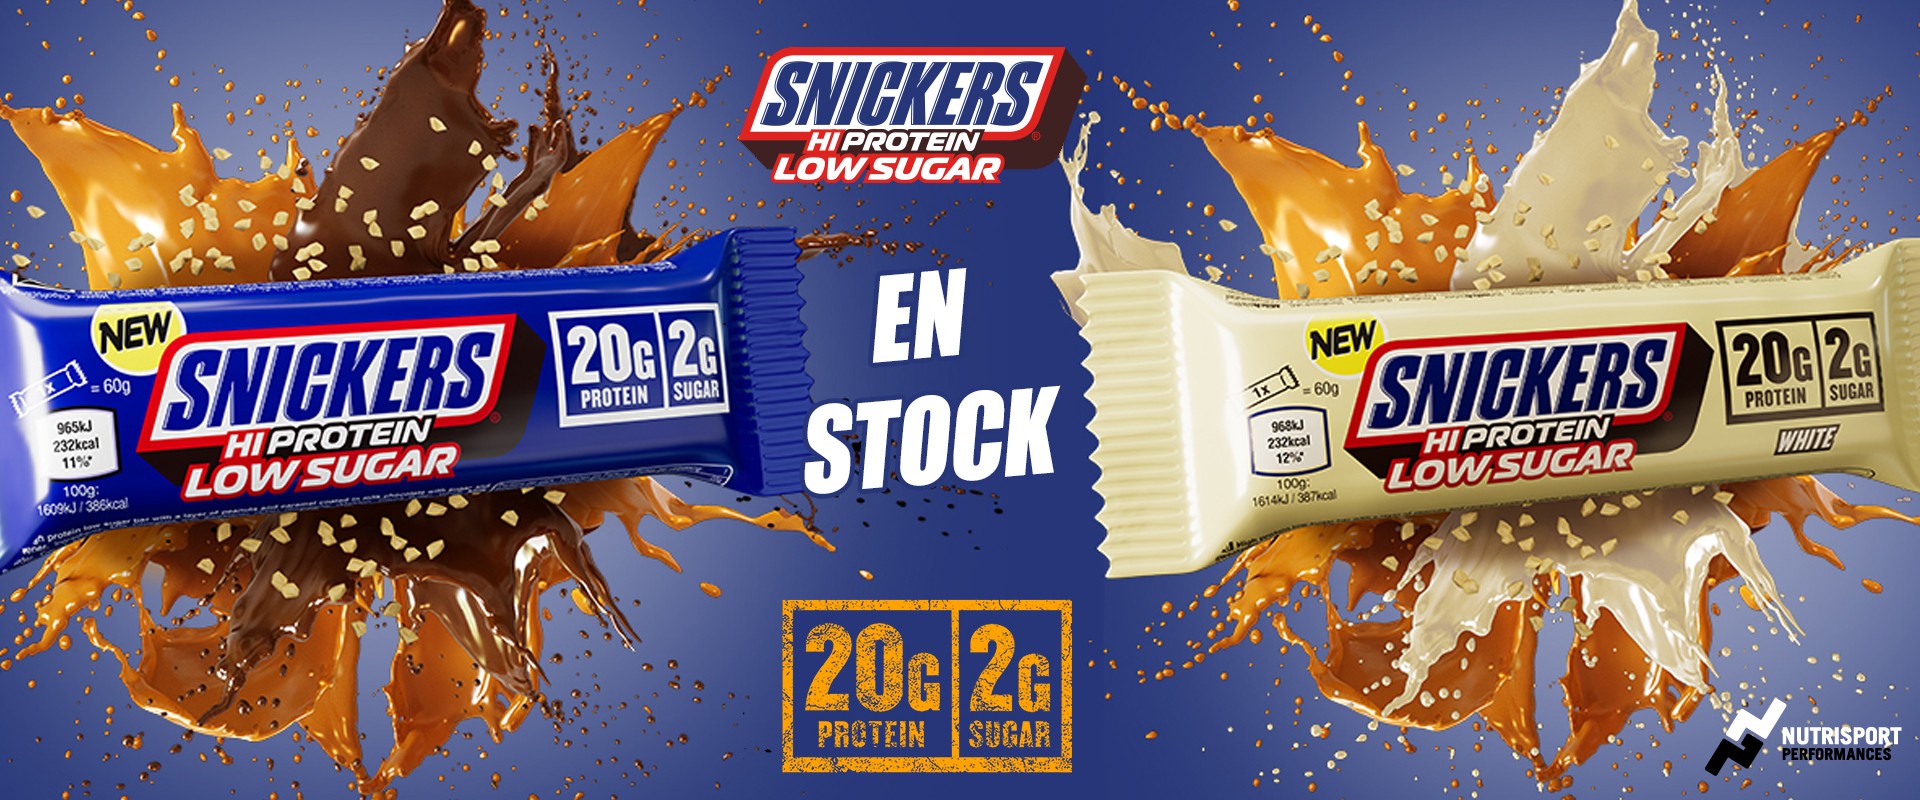 Snickers Low Carb